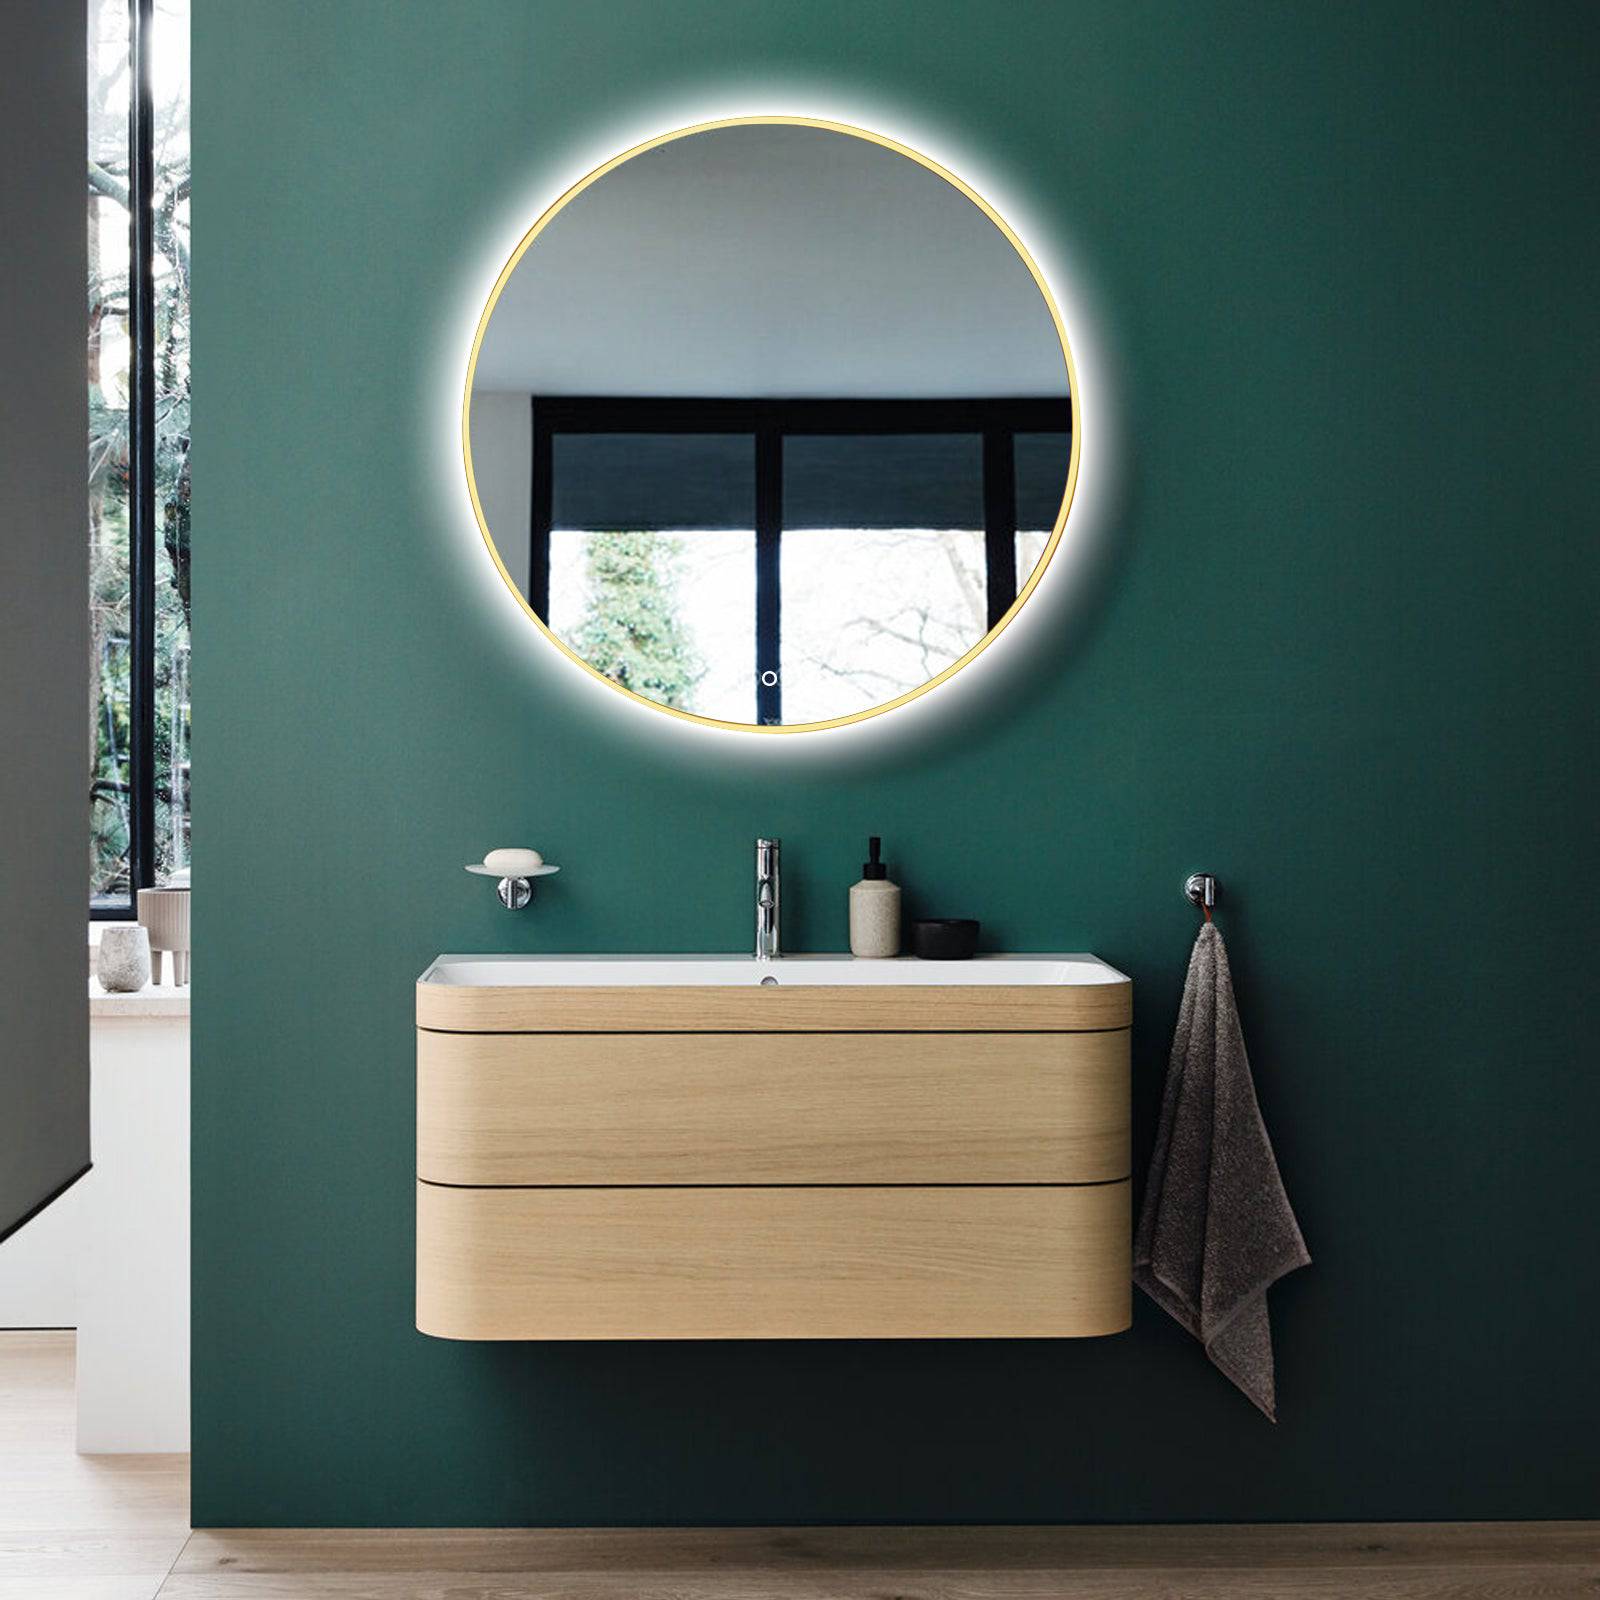 ELL Gold Disk Series - Opulent Gold LED Mirror with Heating Pad - 5mm Copper-Free Glass, Color Temperature Changing, Touch Switch, IP44 Rated - Horizontal Mounting for Stylish Bathrooms and Vanity Spaces - Eco LED Lightings 